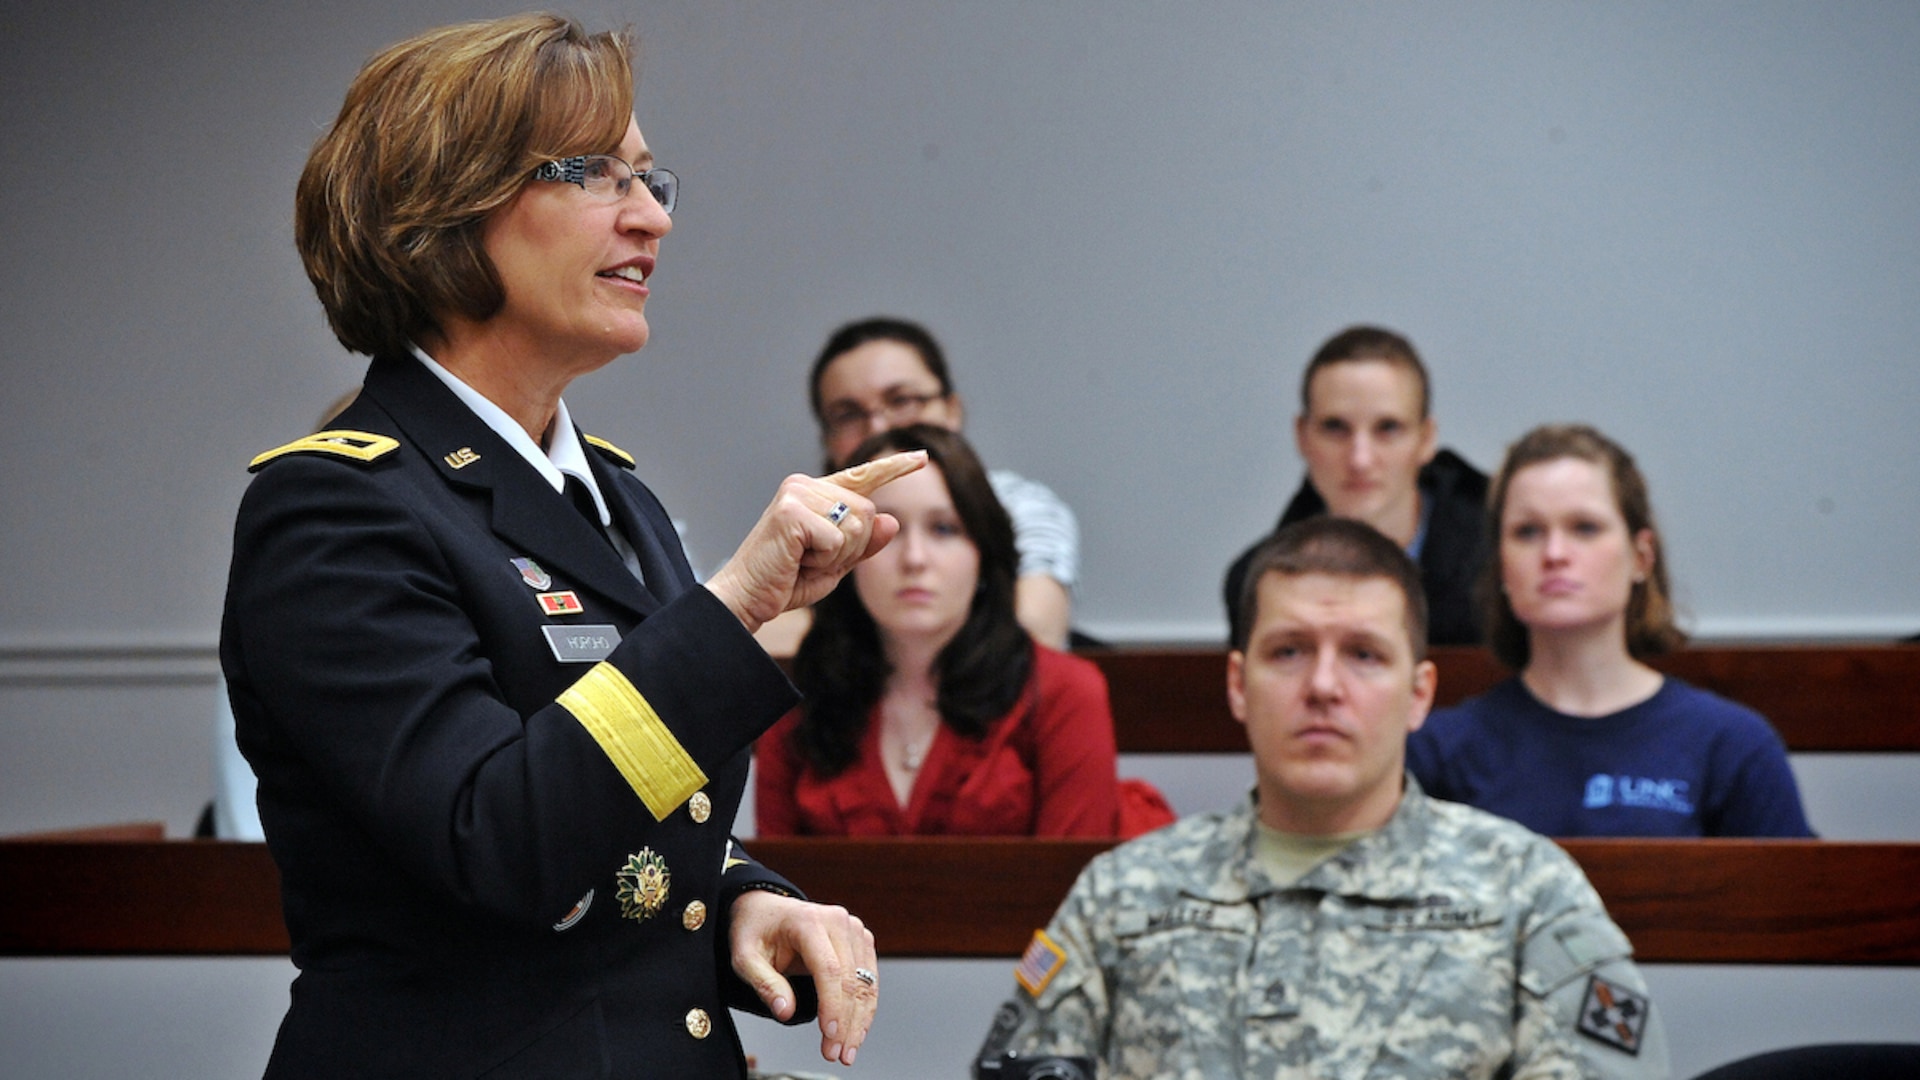 Maj. Gen Patricia Horoho during her talk to students from the School of Nursing and the Kenan Flagler Business School at the University of North Carolina at Chapel Hill.